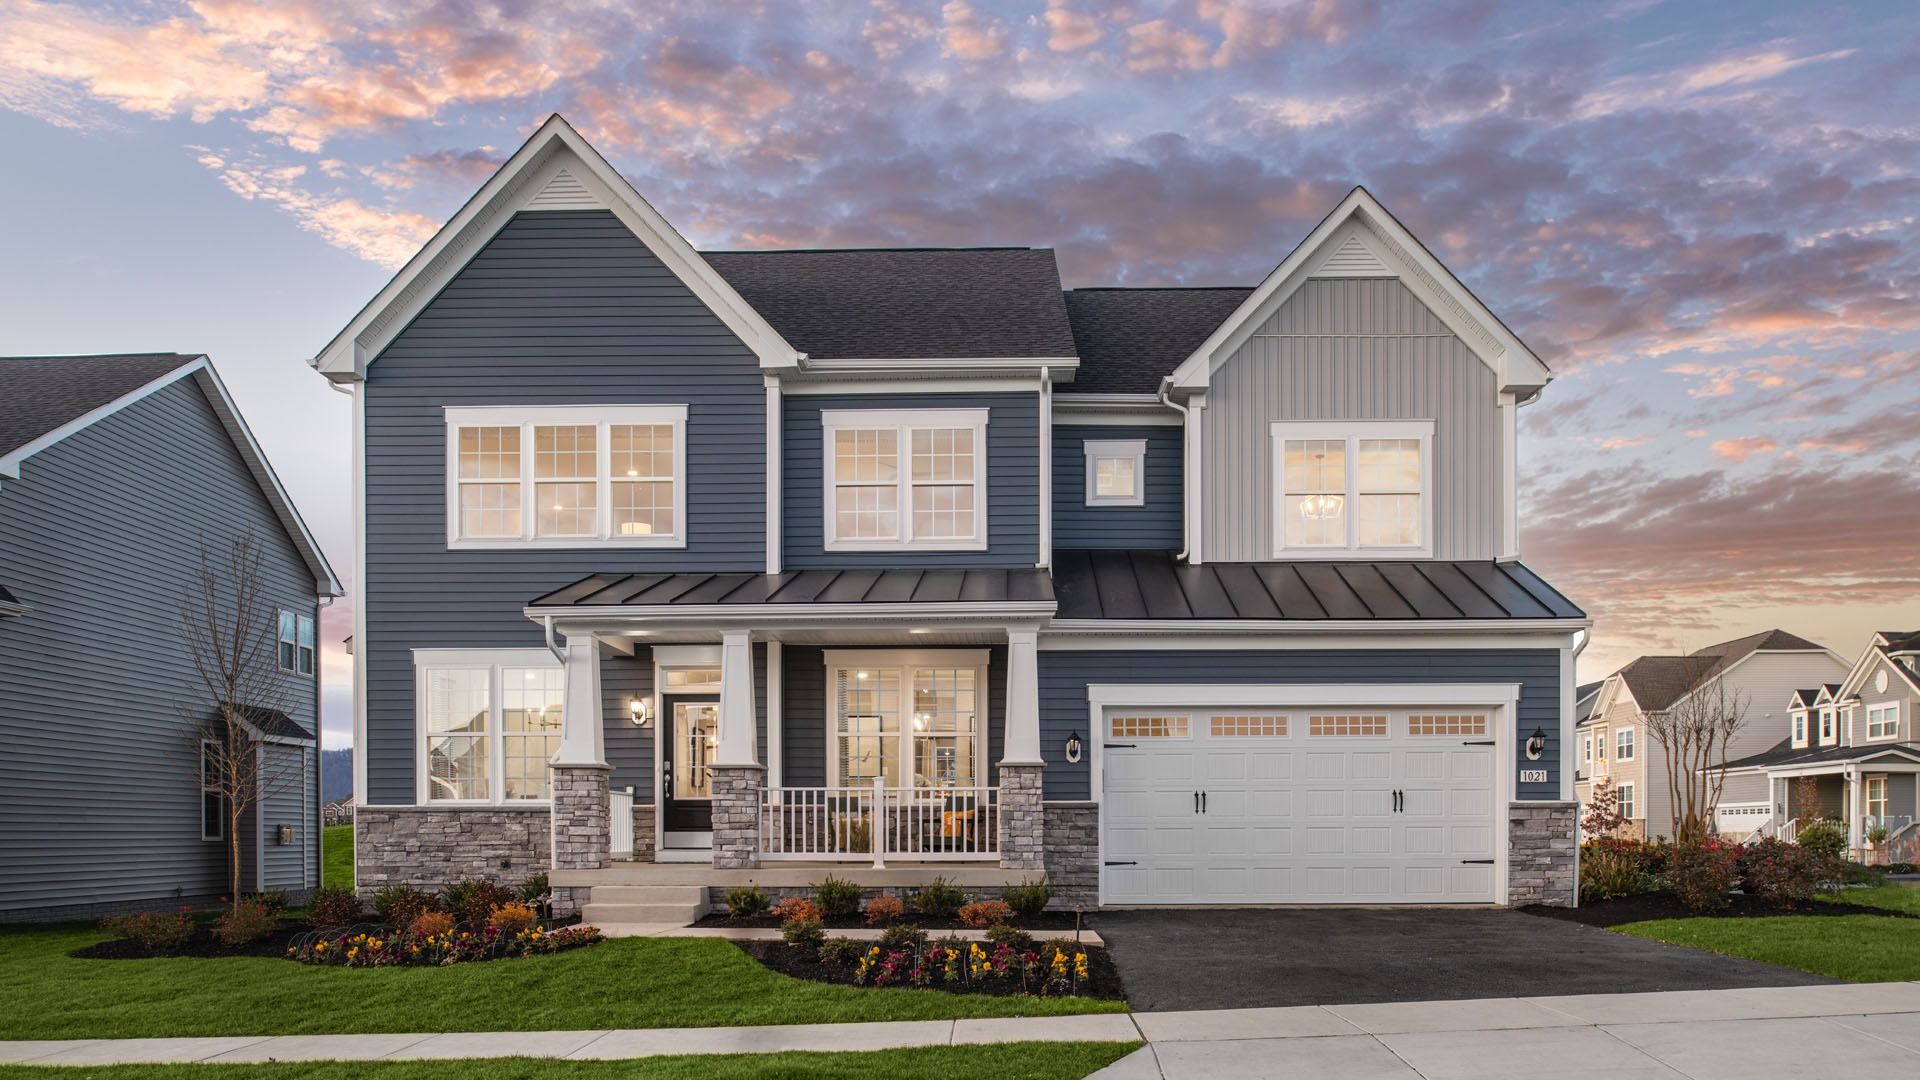 Emory II Elevation 14  Single Family Home:Single Family Home at Brunswick Crossing in Brunswick, Maryland by DRB Homes